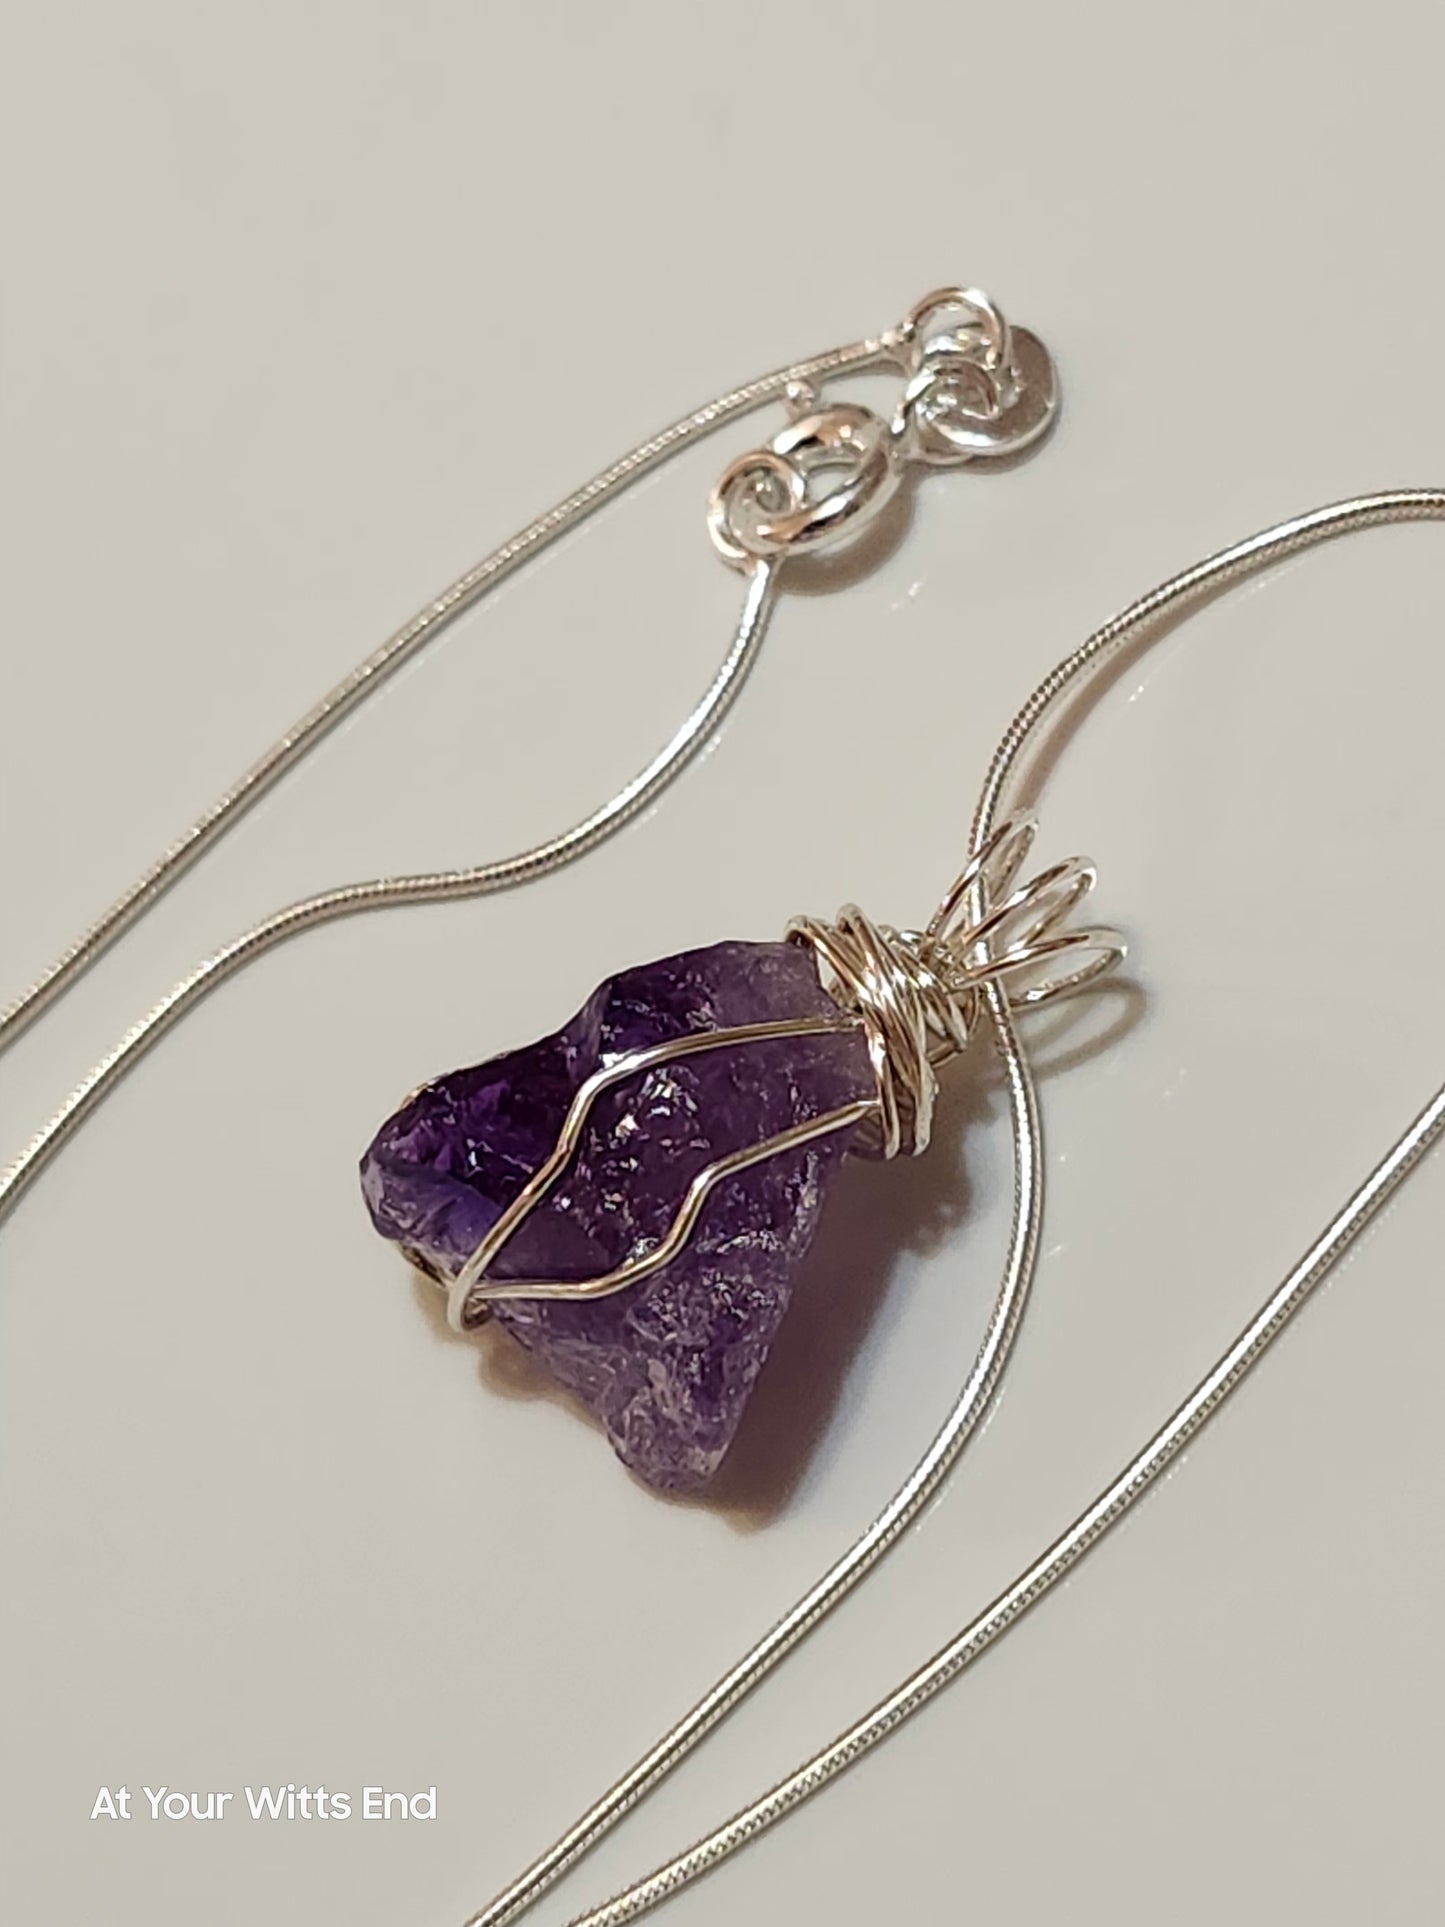 Genuine Amethyst Stone Necklace, sterling silver chain 18"